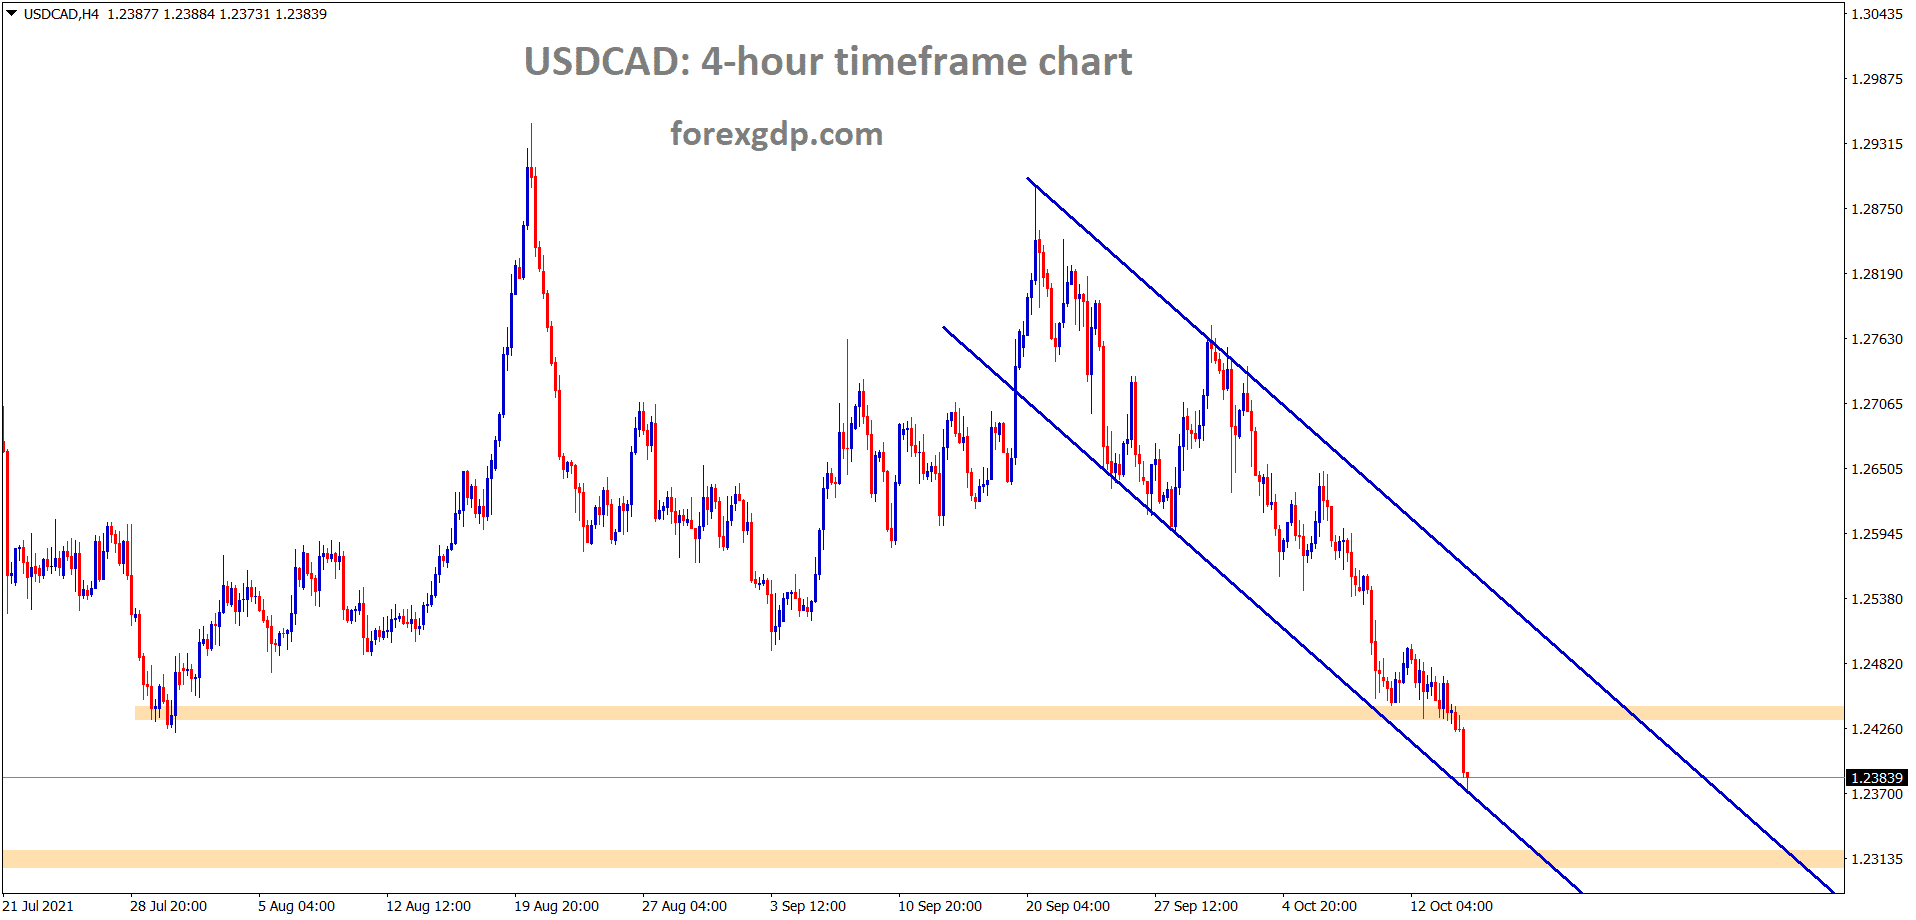 USDCAD is moving with strong sellers pressure due to increase in crude oil prices USDCAD is breaking all the recent supports without much retracements